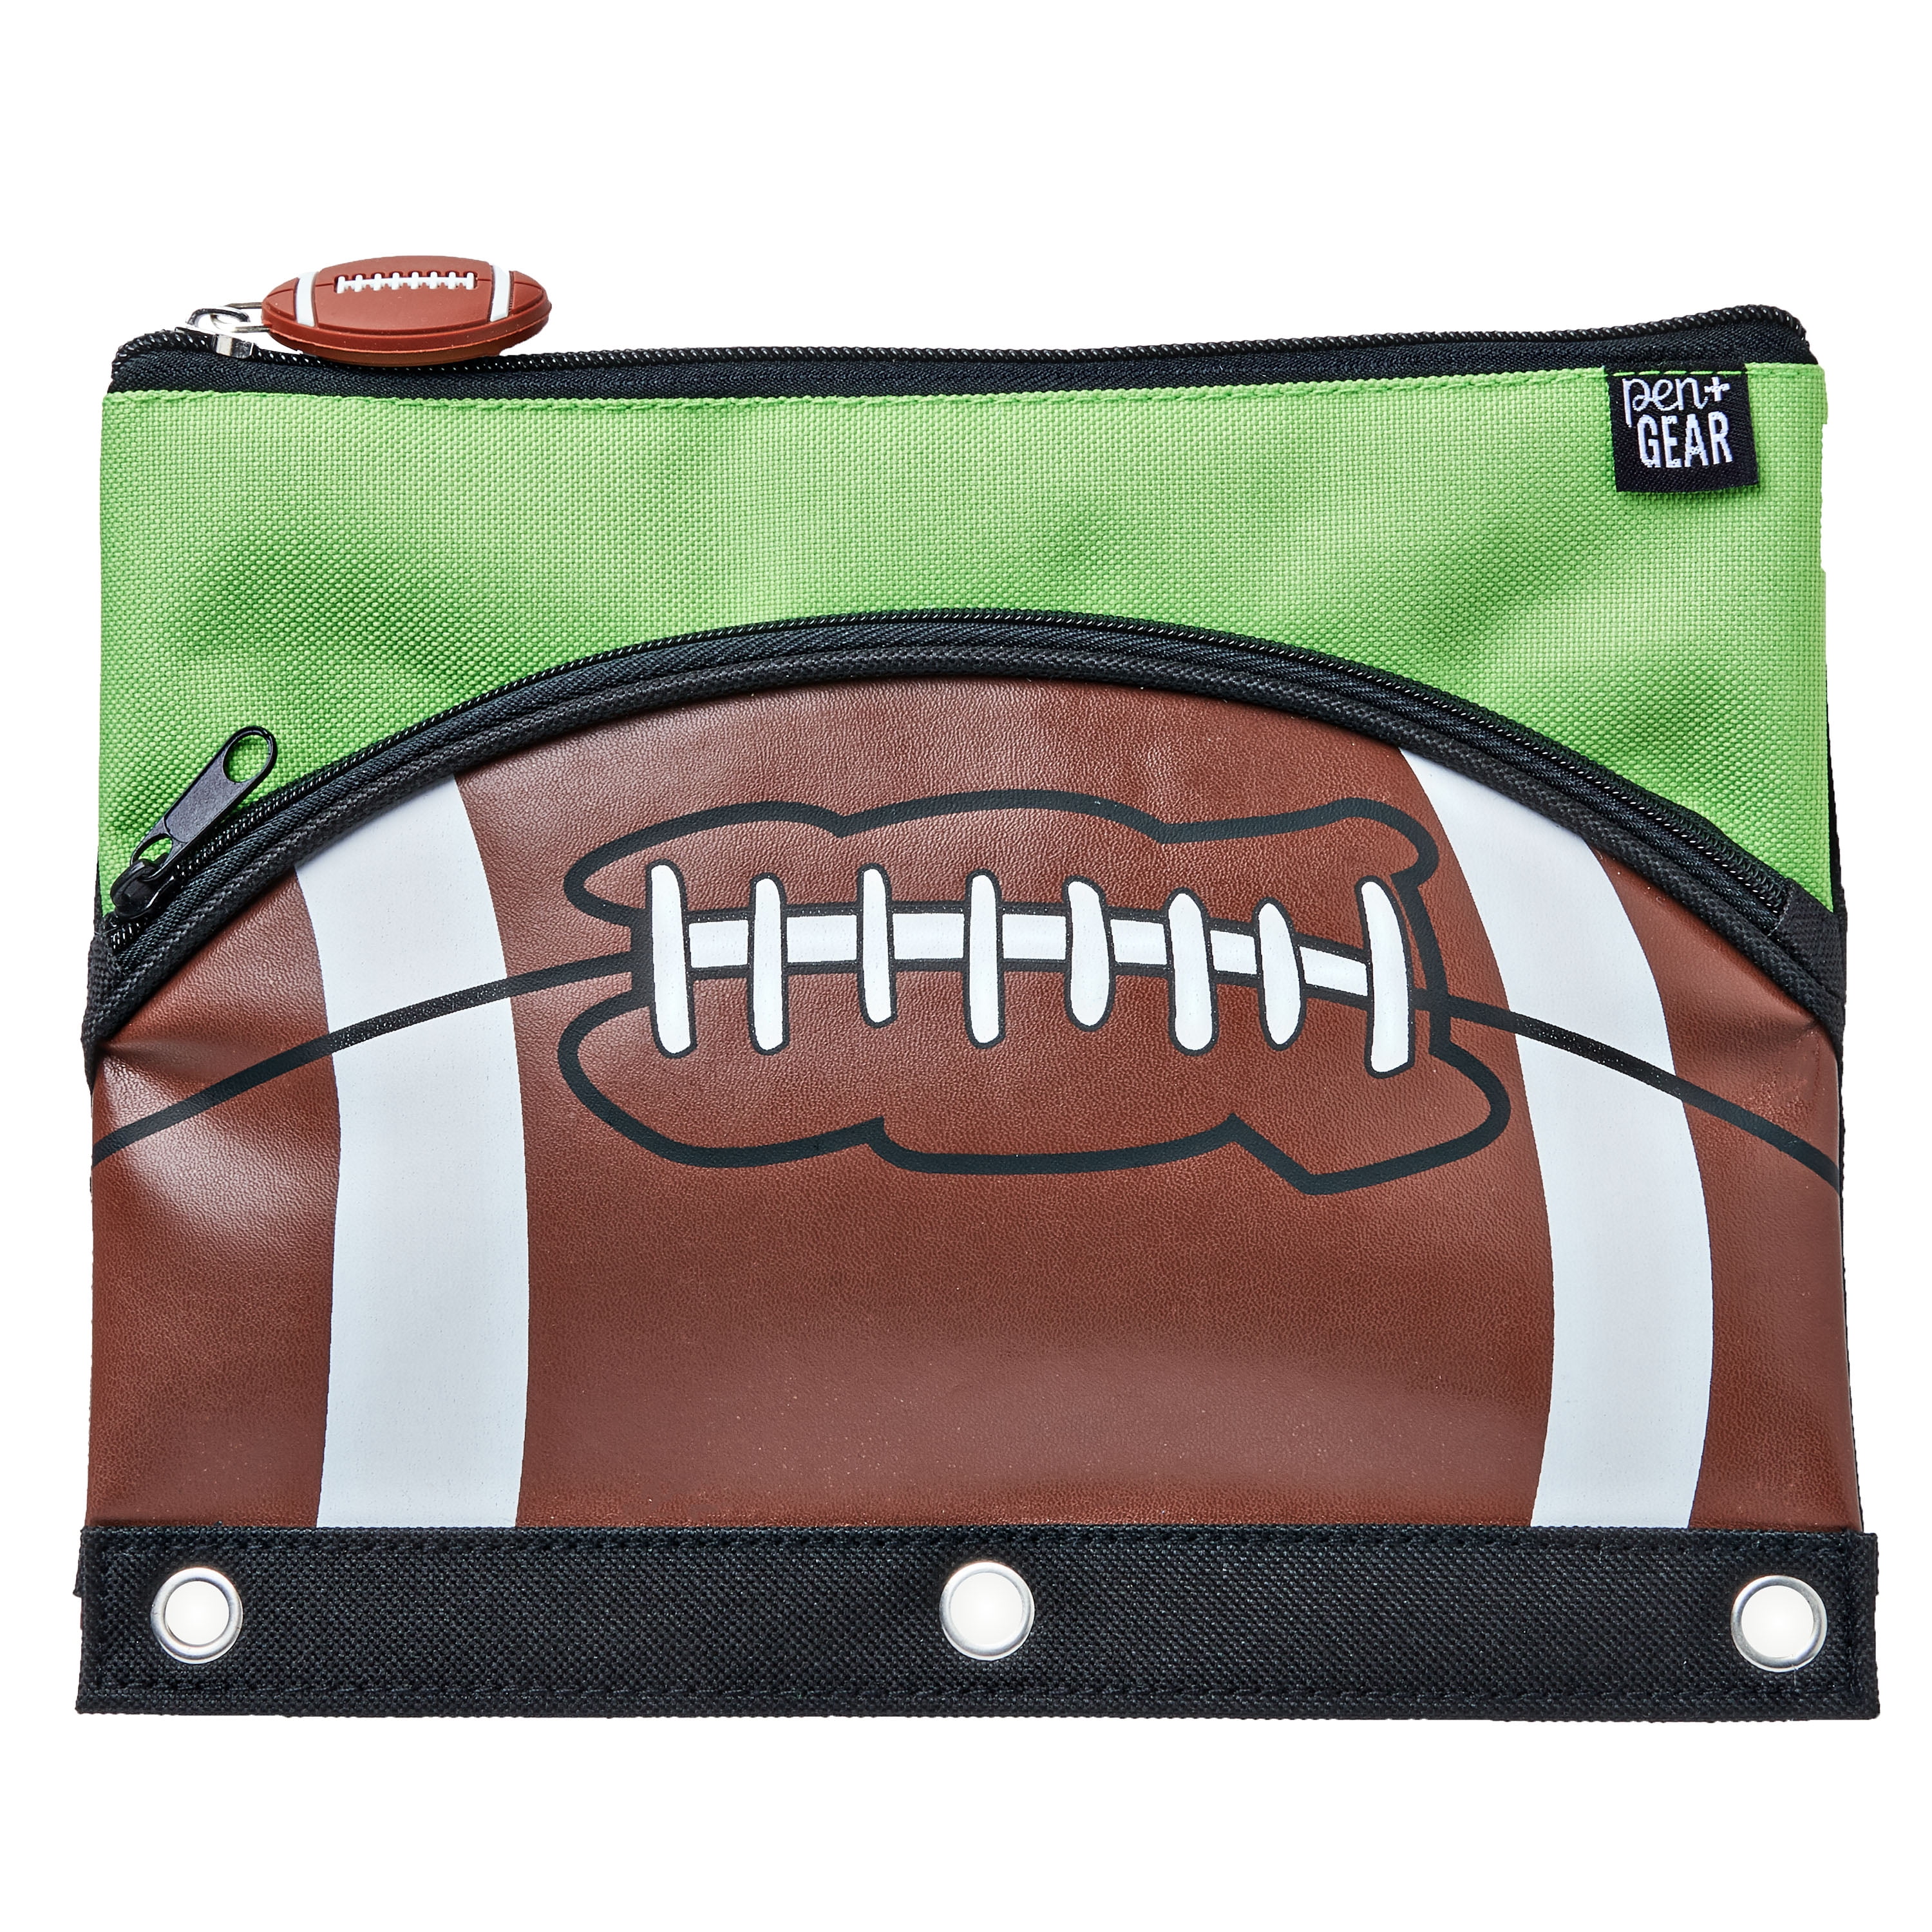 School Supplies Sports 9.375 x 6.375 in Football and Basketball Zipper Binder Pouches Back-to-School Pencil Pouch for 3-Ring Binder Set of 2 